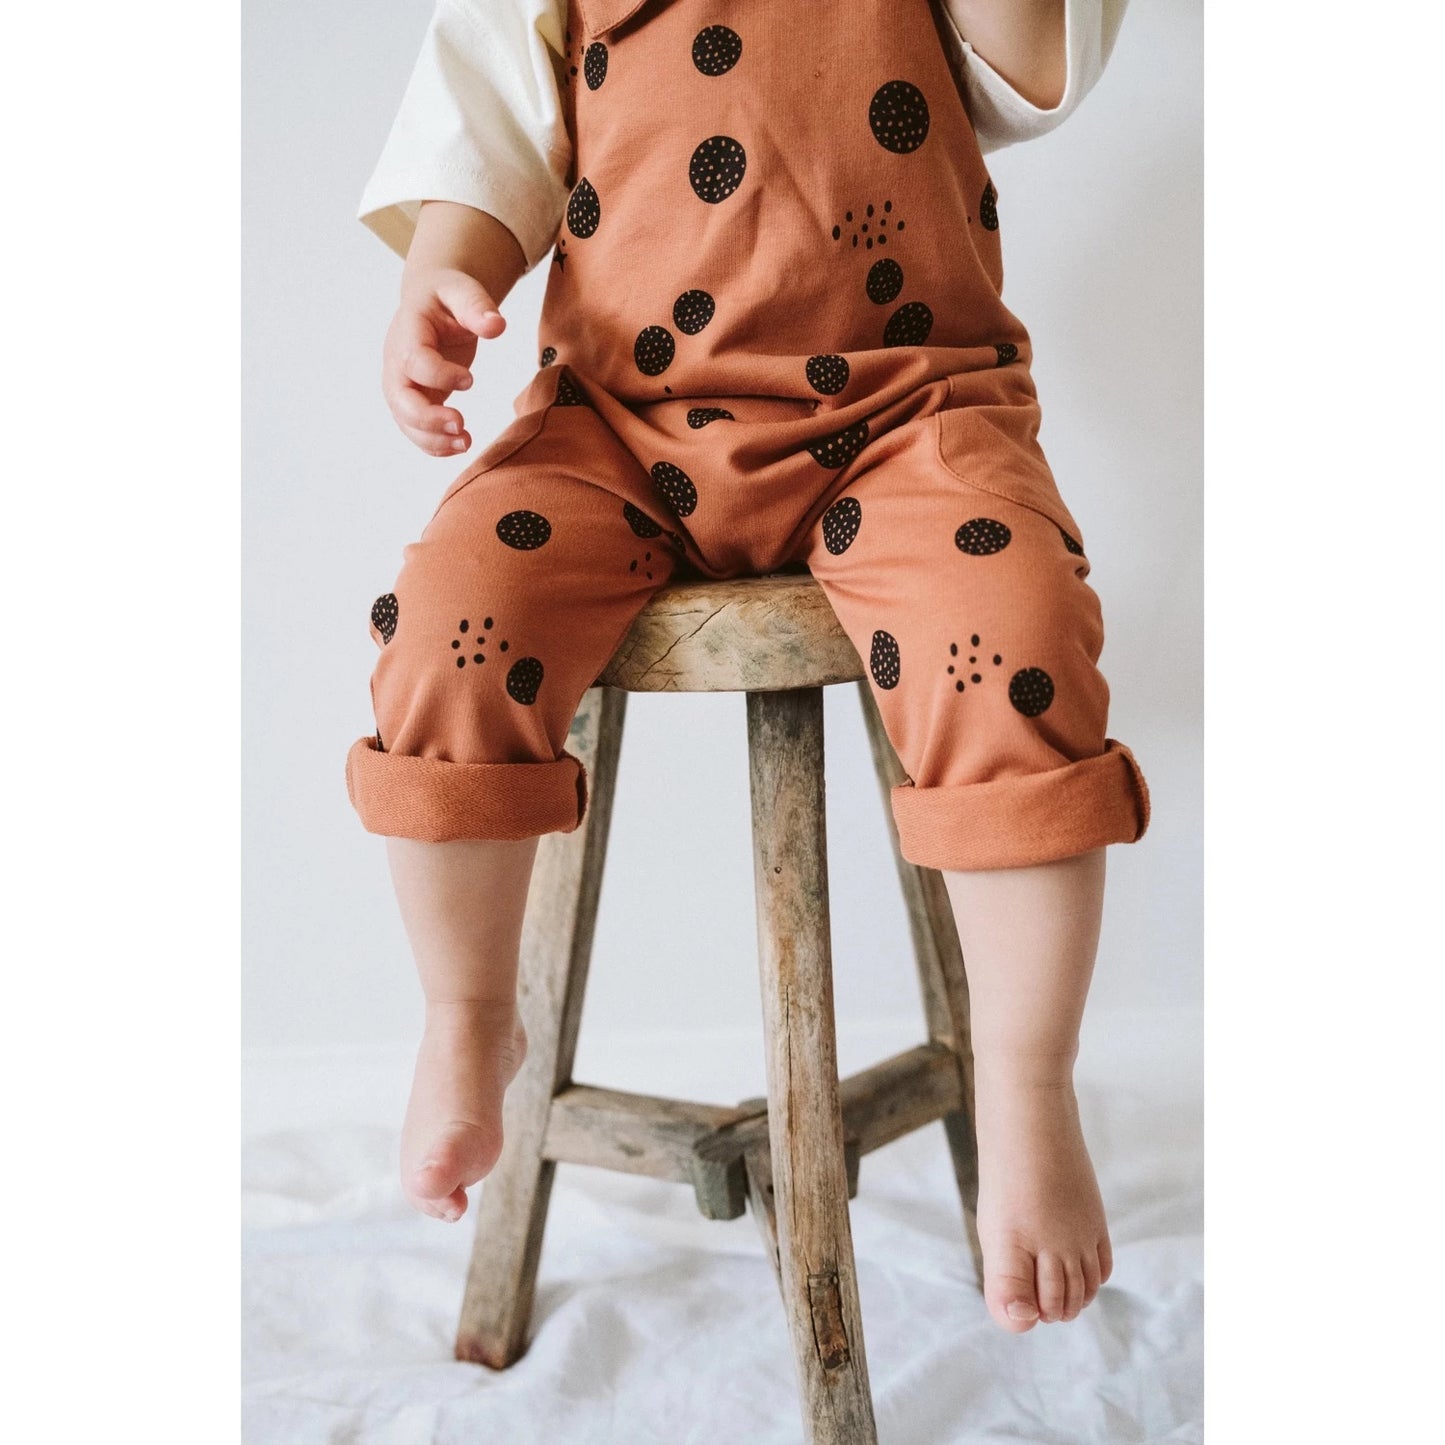 Moonkids Collective All Seasons Dungarees - Lunar